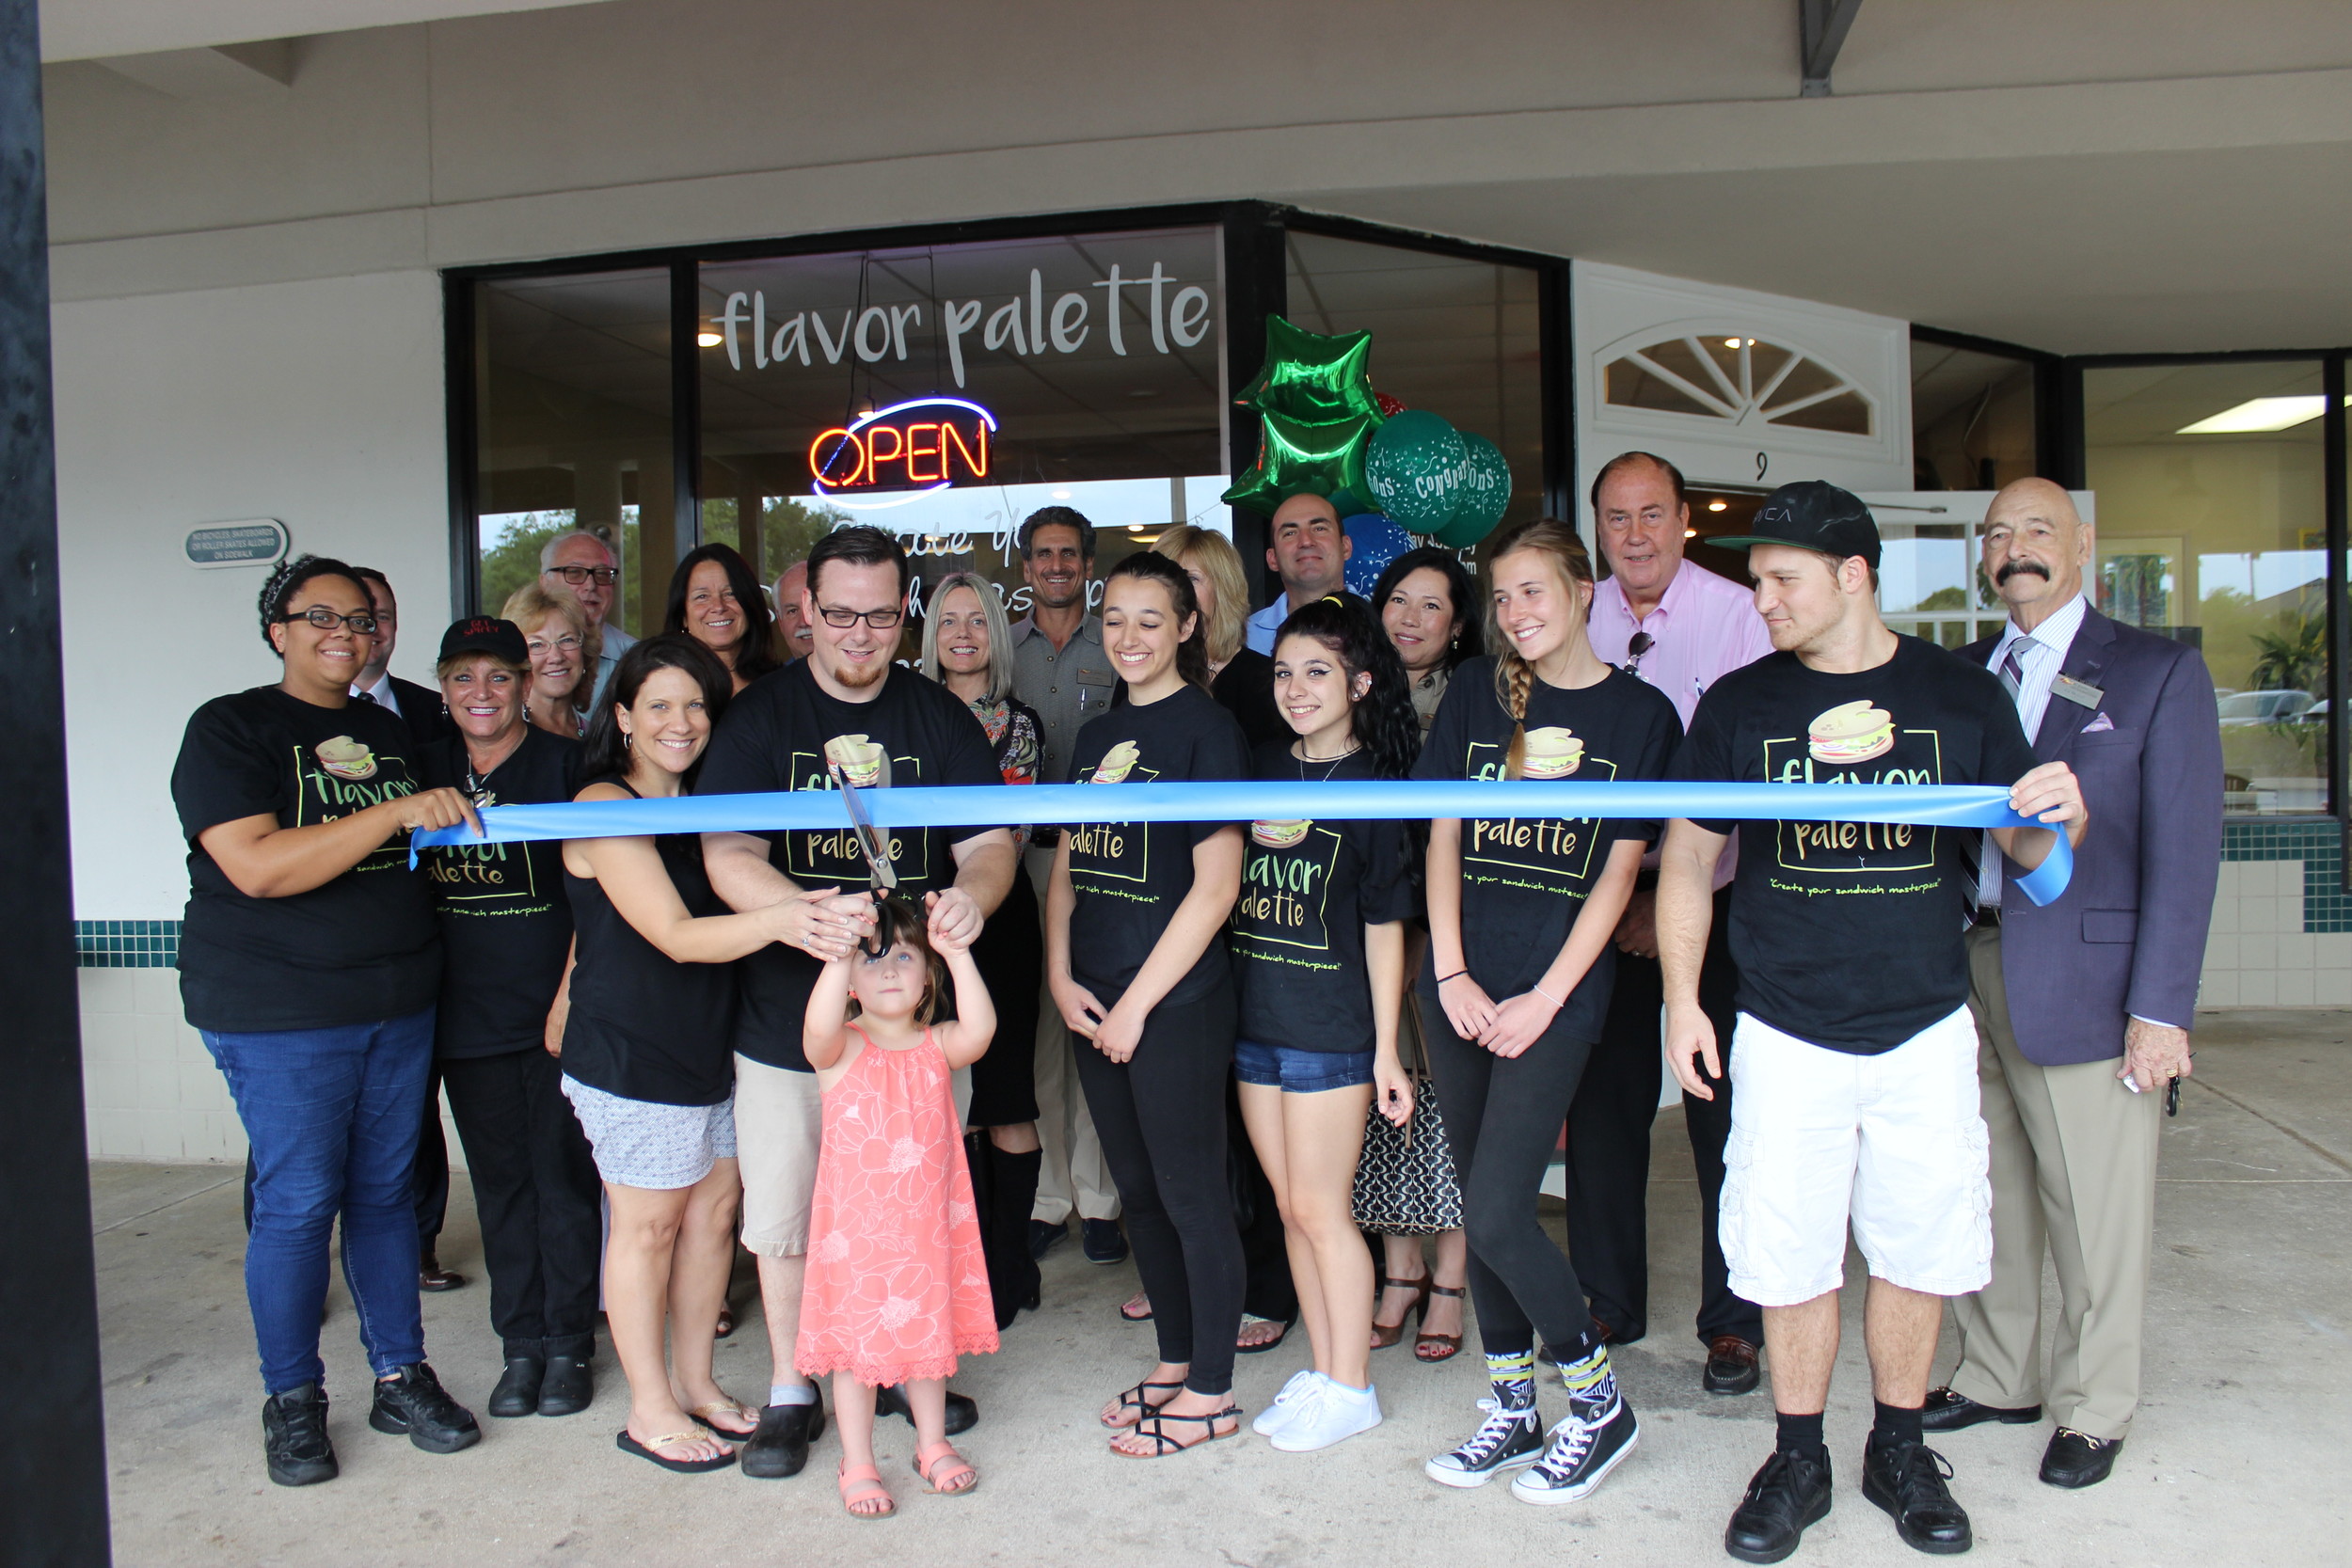 Chef Tommy McDonough cuts the ribbon on his new restaurant, Flavor Palette.